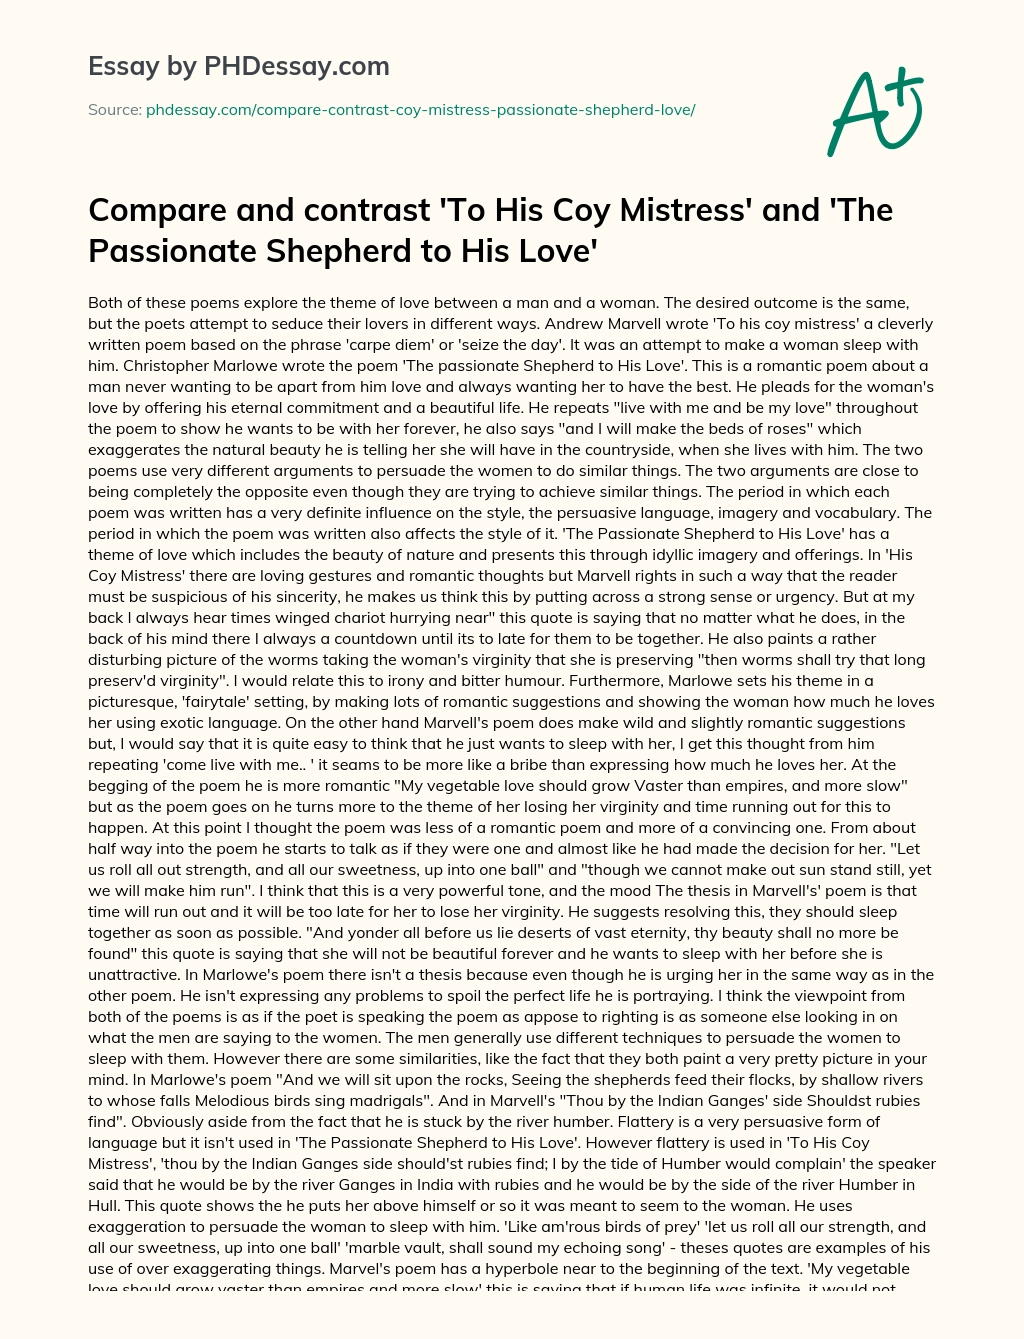 to his coy mistress summary sparknotes